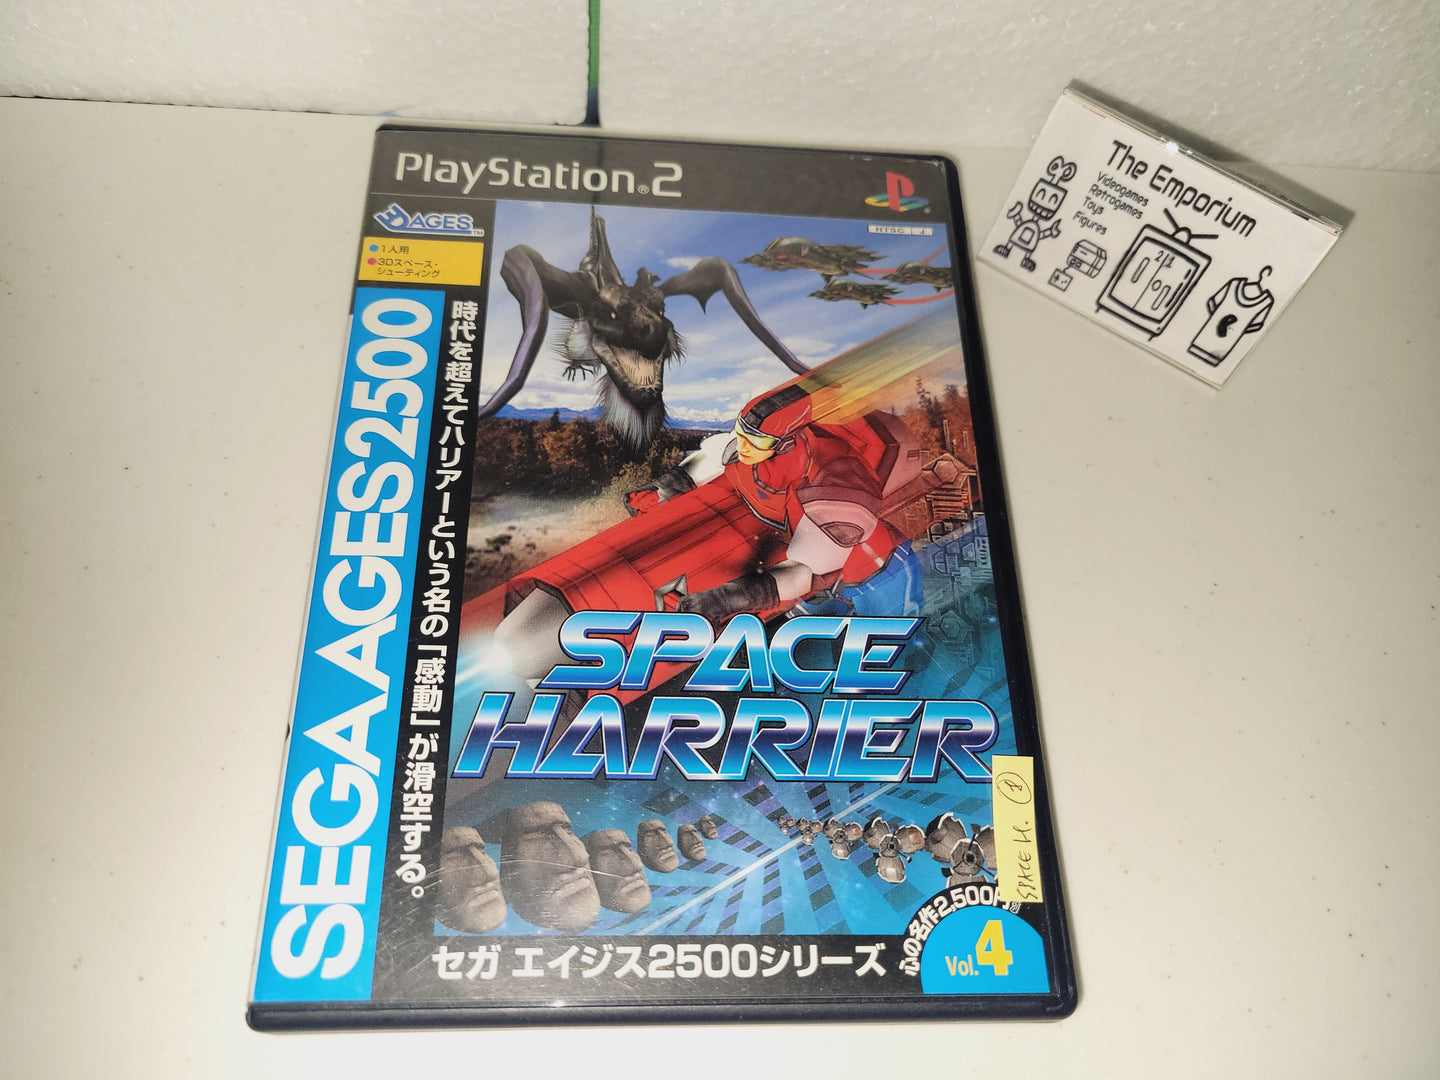 Sega AGES 2500 Series Vol. 4 Space Harrier - Sony playstation 2